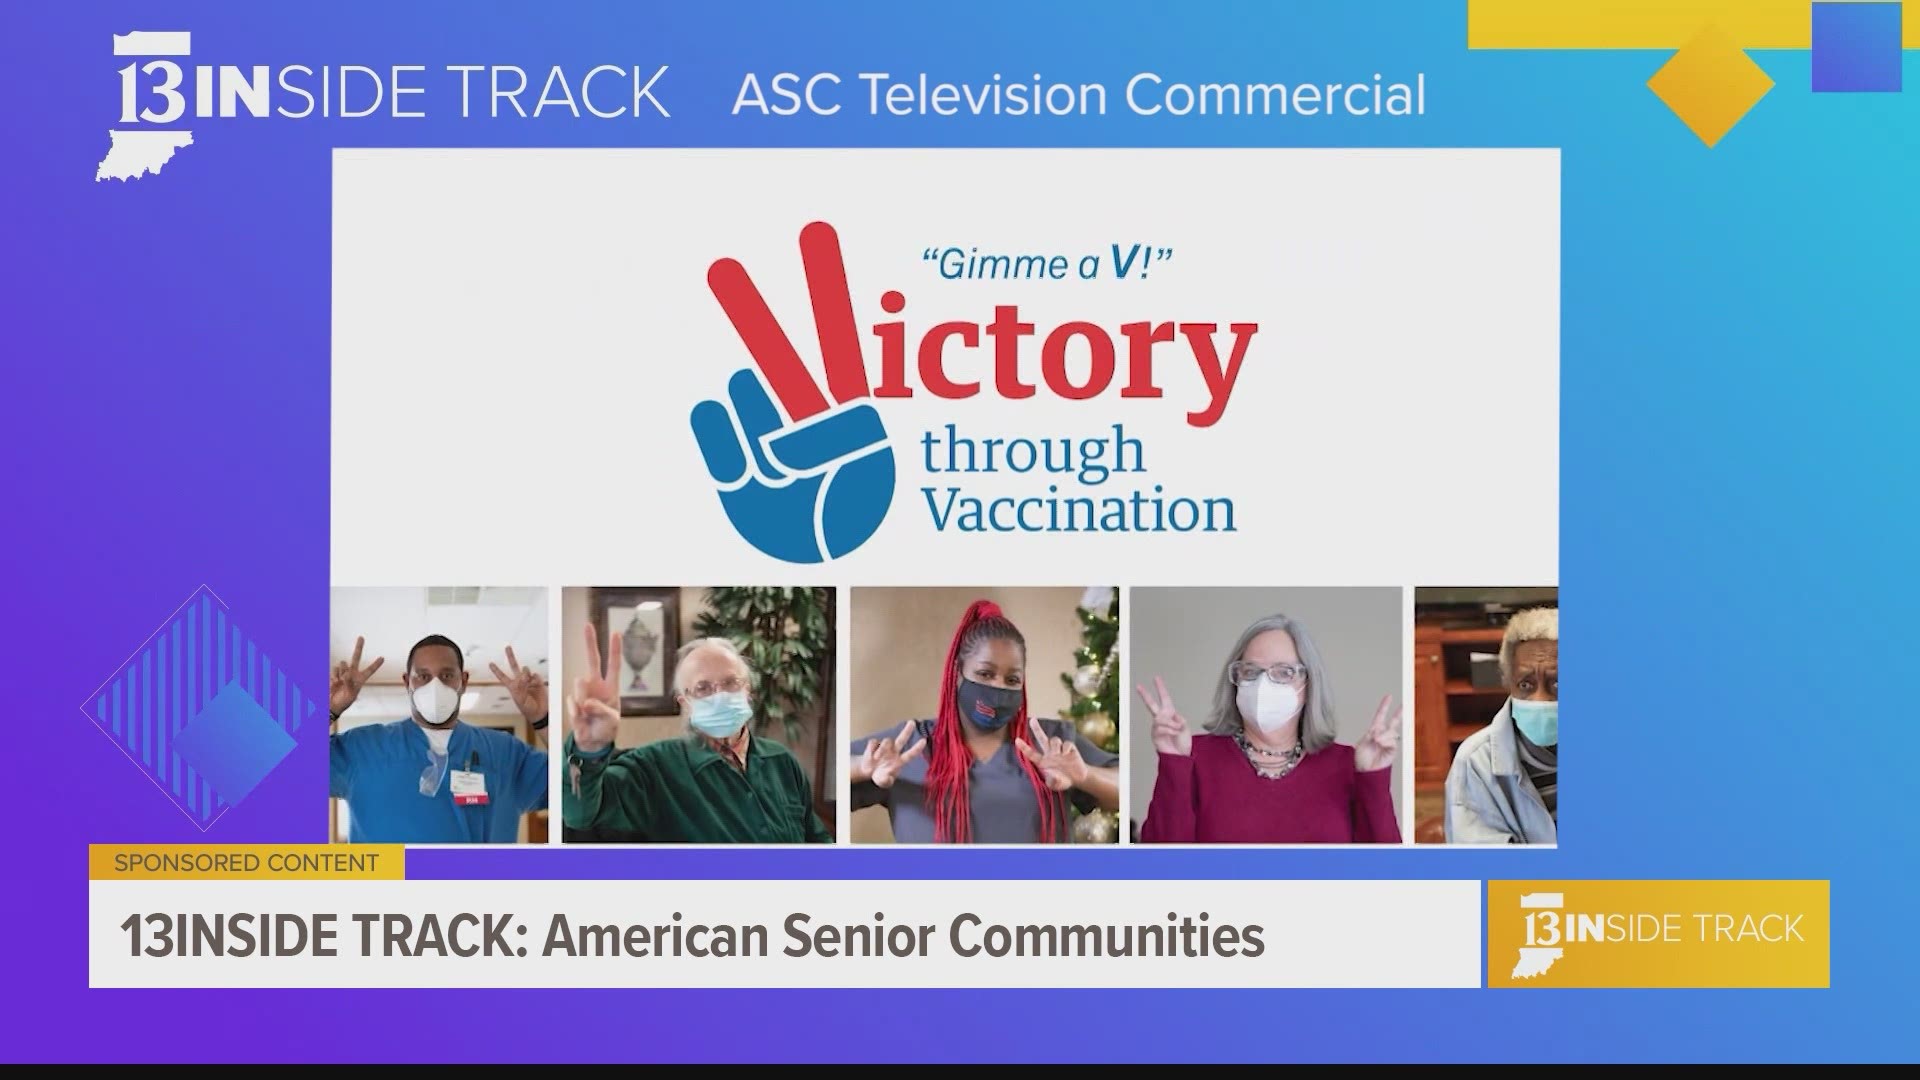 American Senior Communities is dedicated to spreading the word about the COVID-19 vaccine through their "Victory Through Vaccination" campaign.